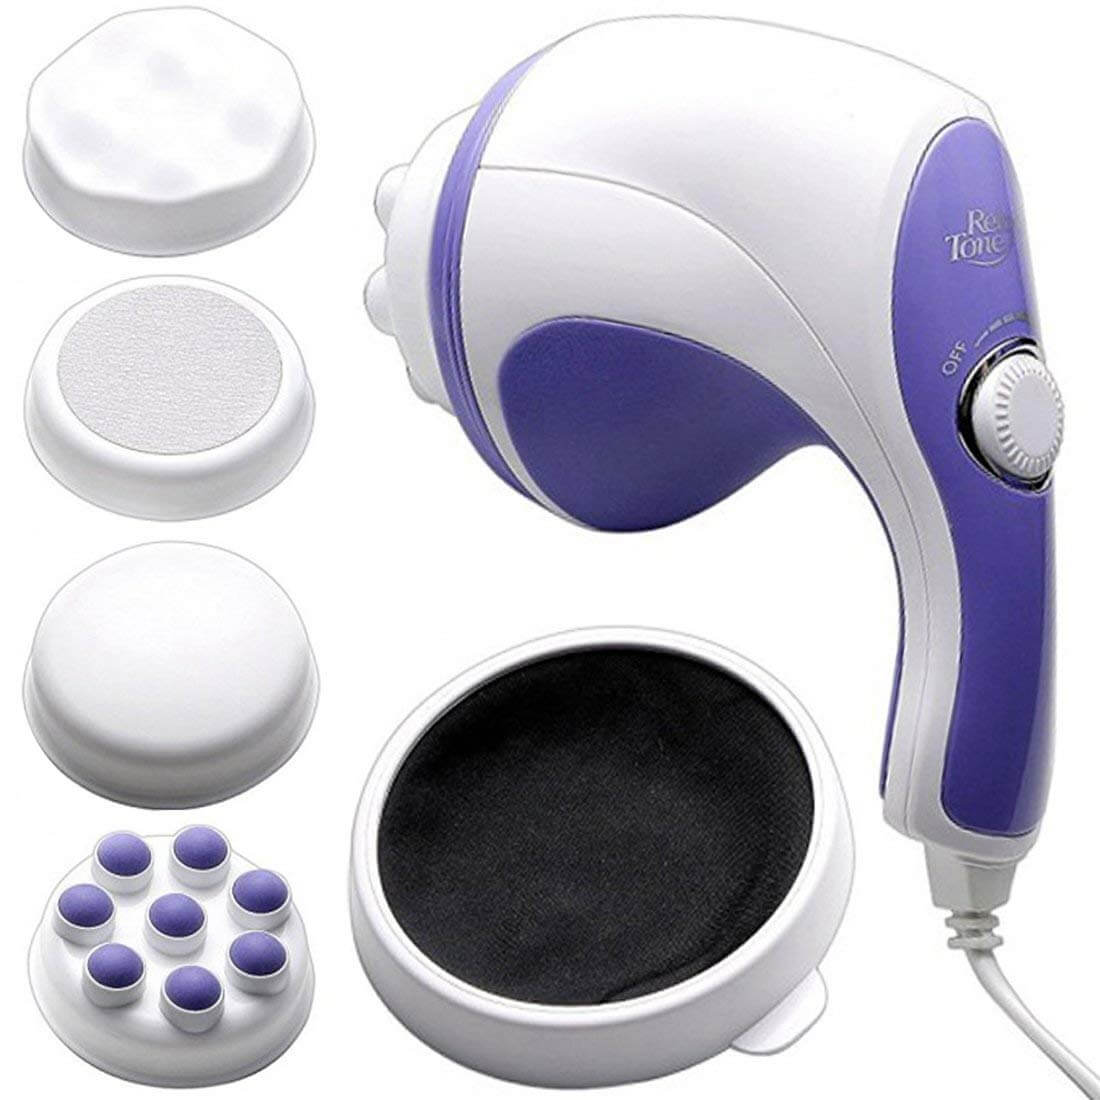 ELRINZA Relax Spin Tone Body Massager Machine, Full Body Massager